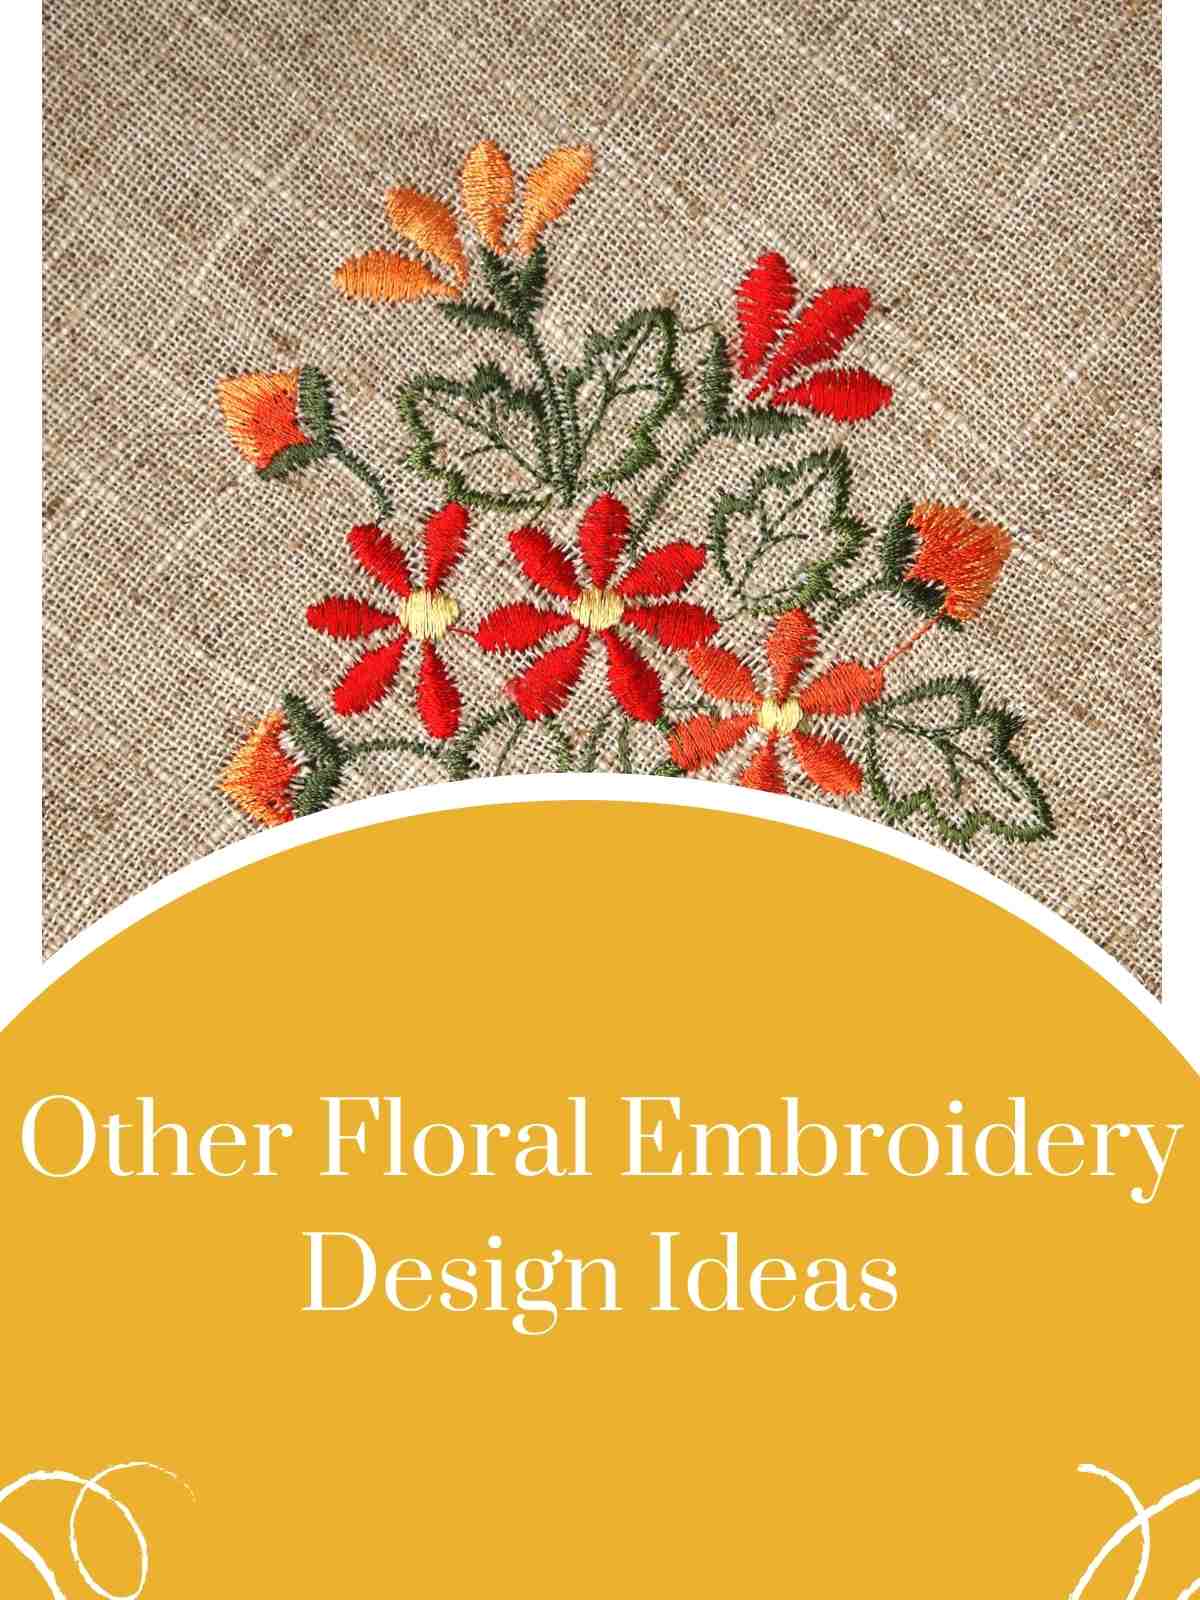 Floral embroidery patterns and designs